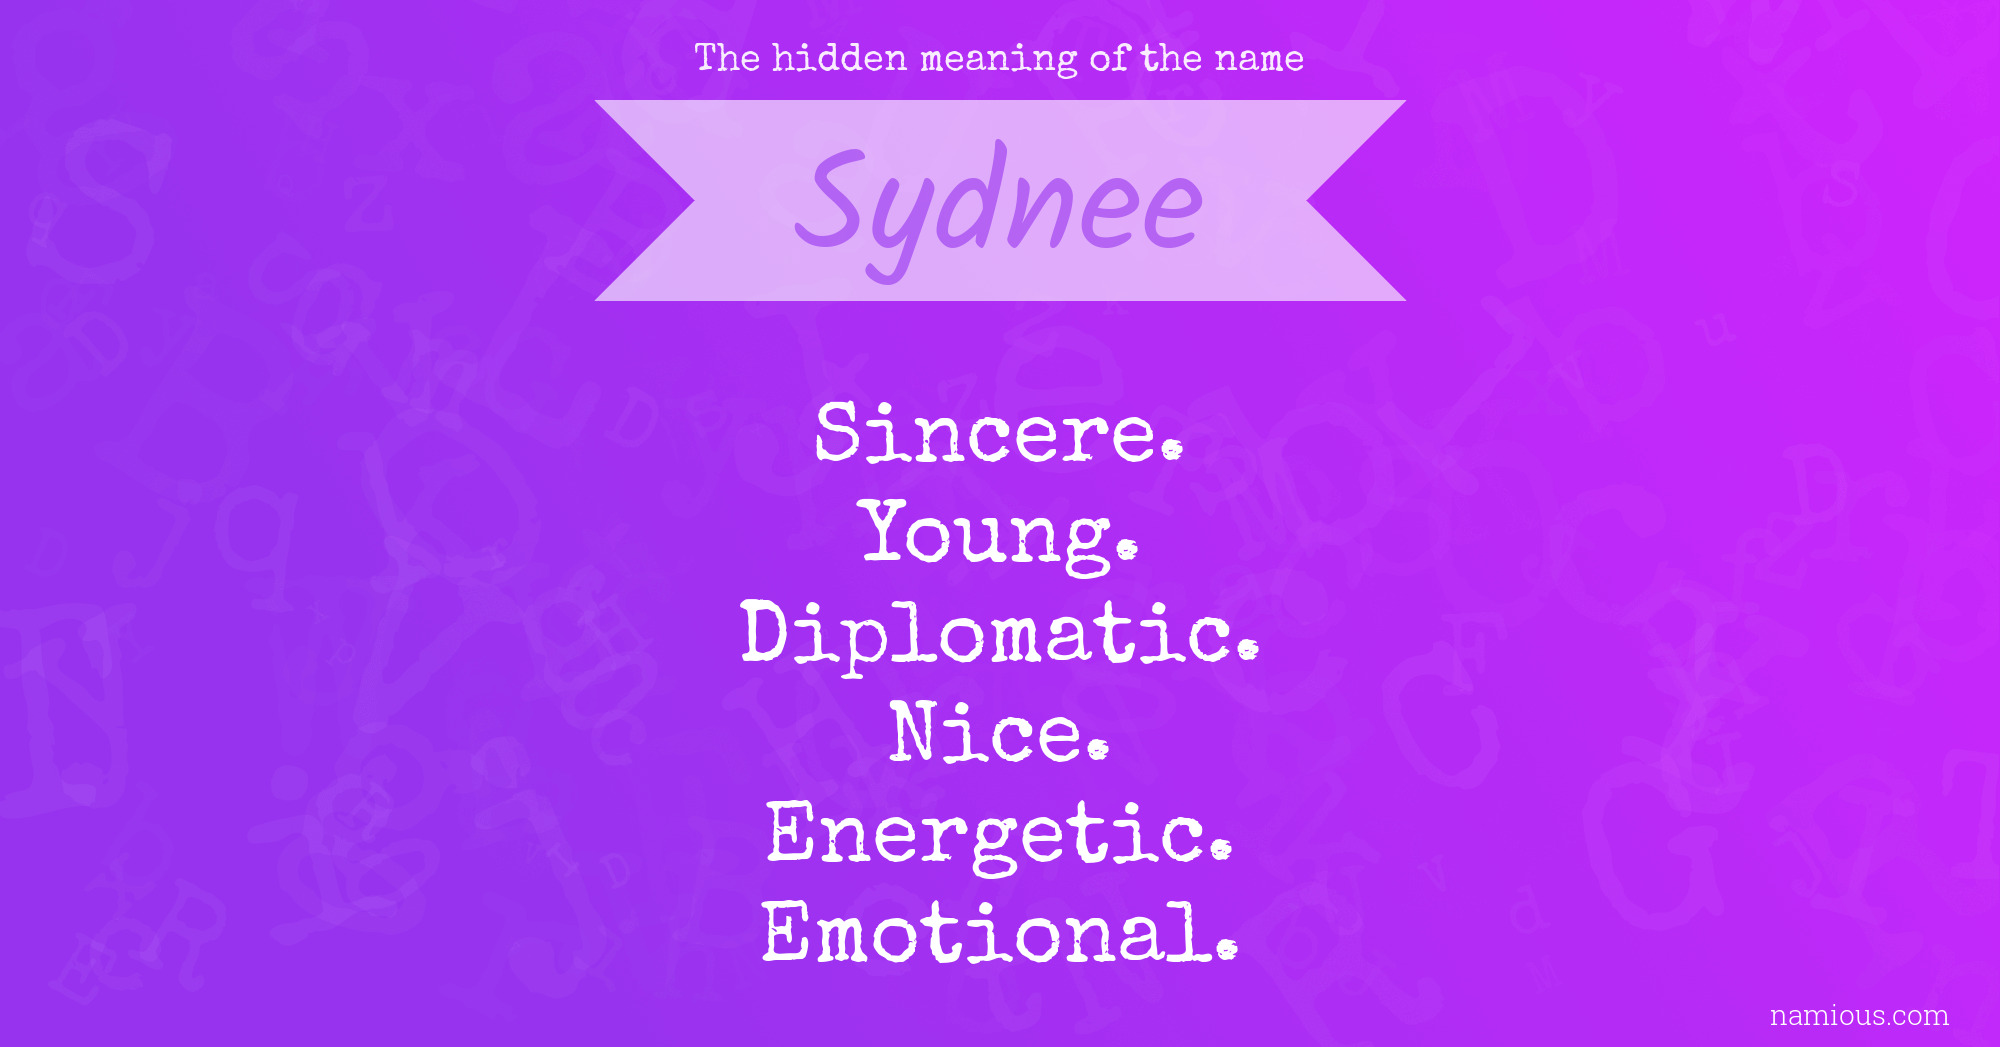 The hidden meaning of the name Sydnee